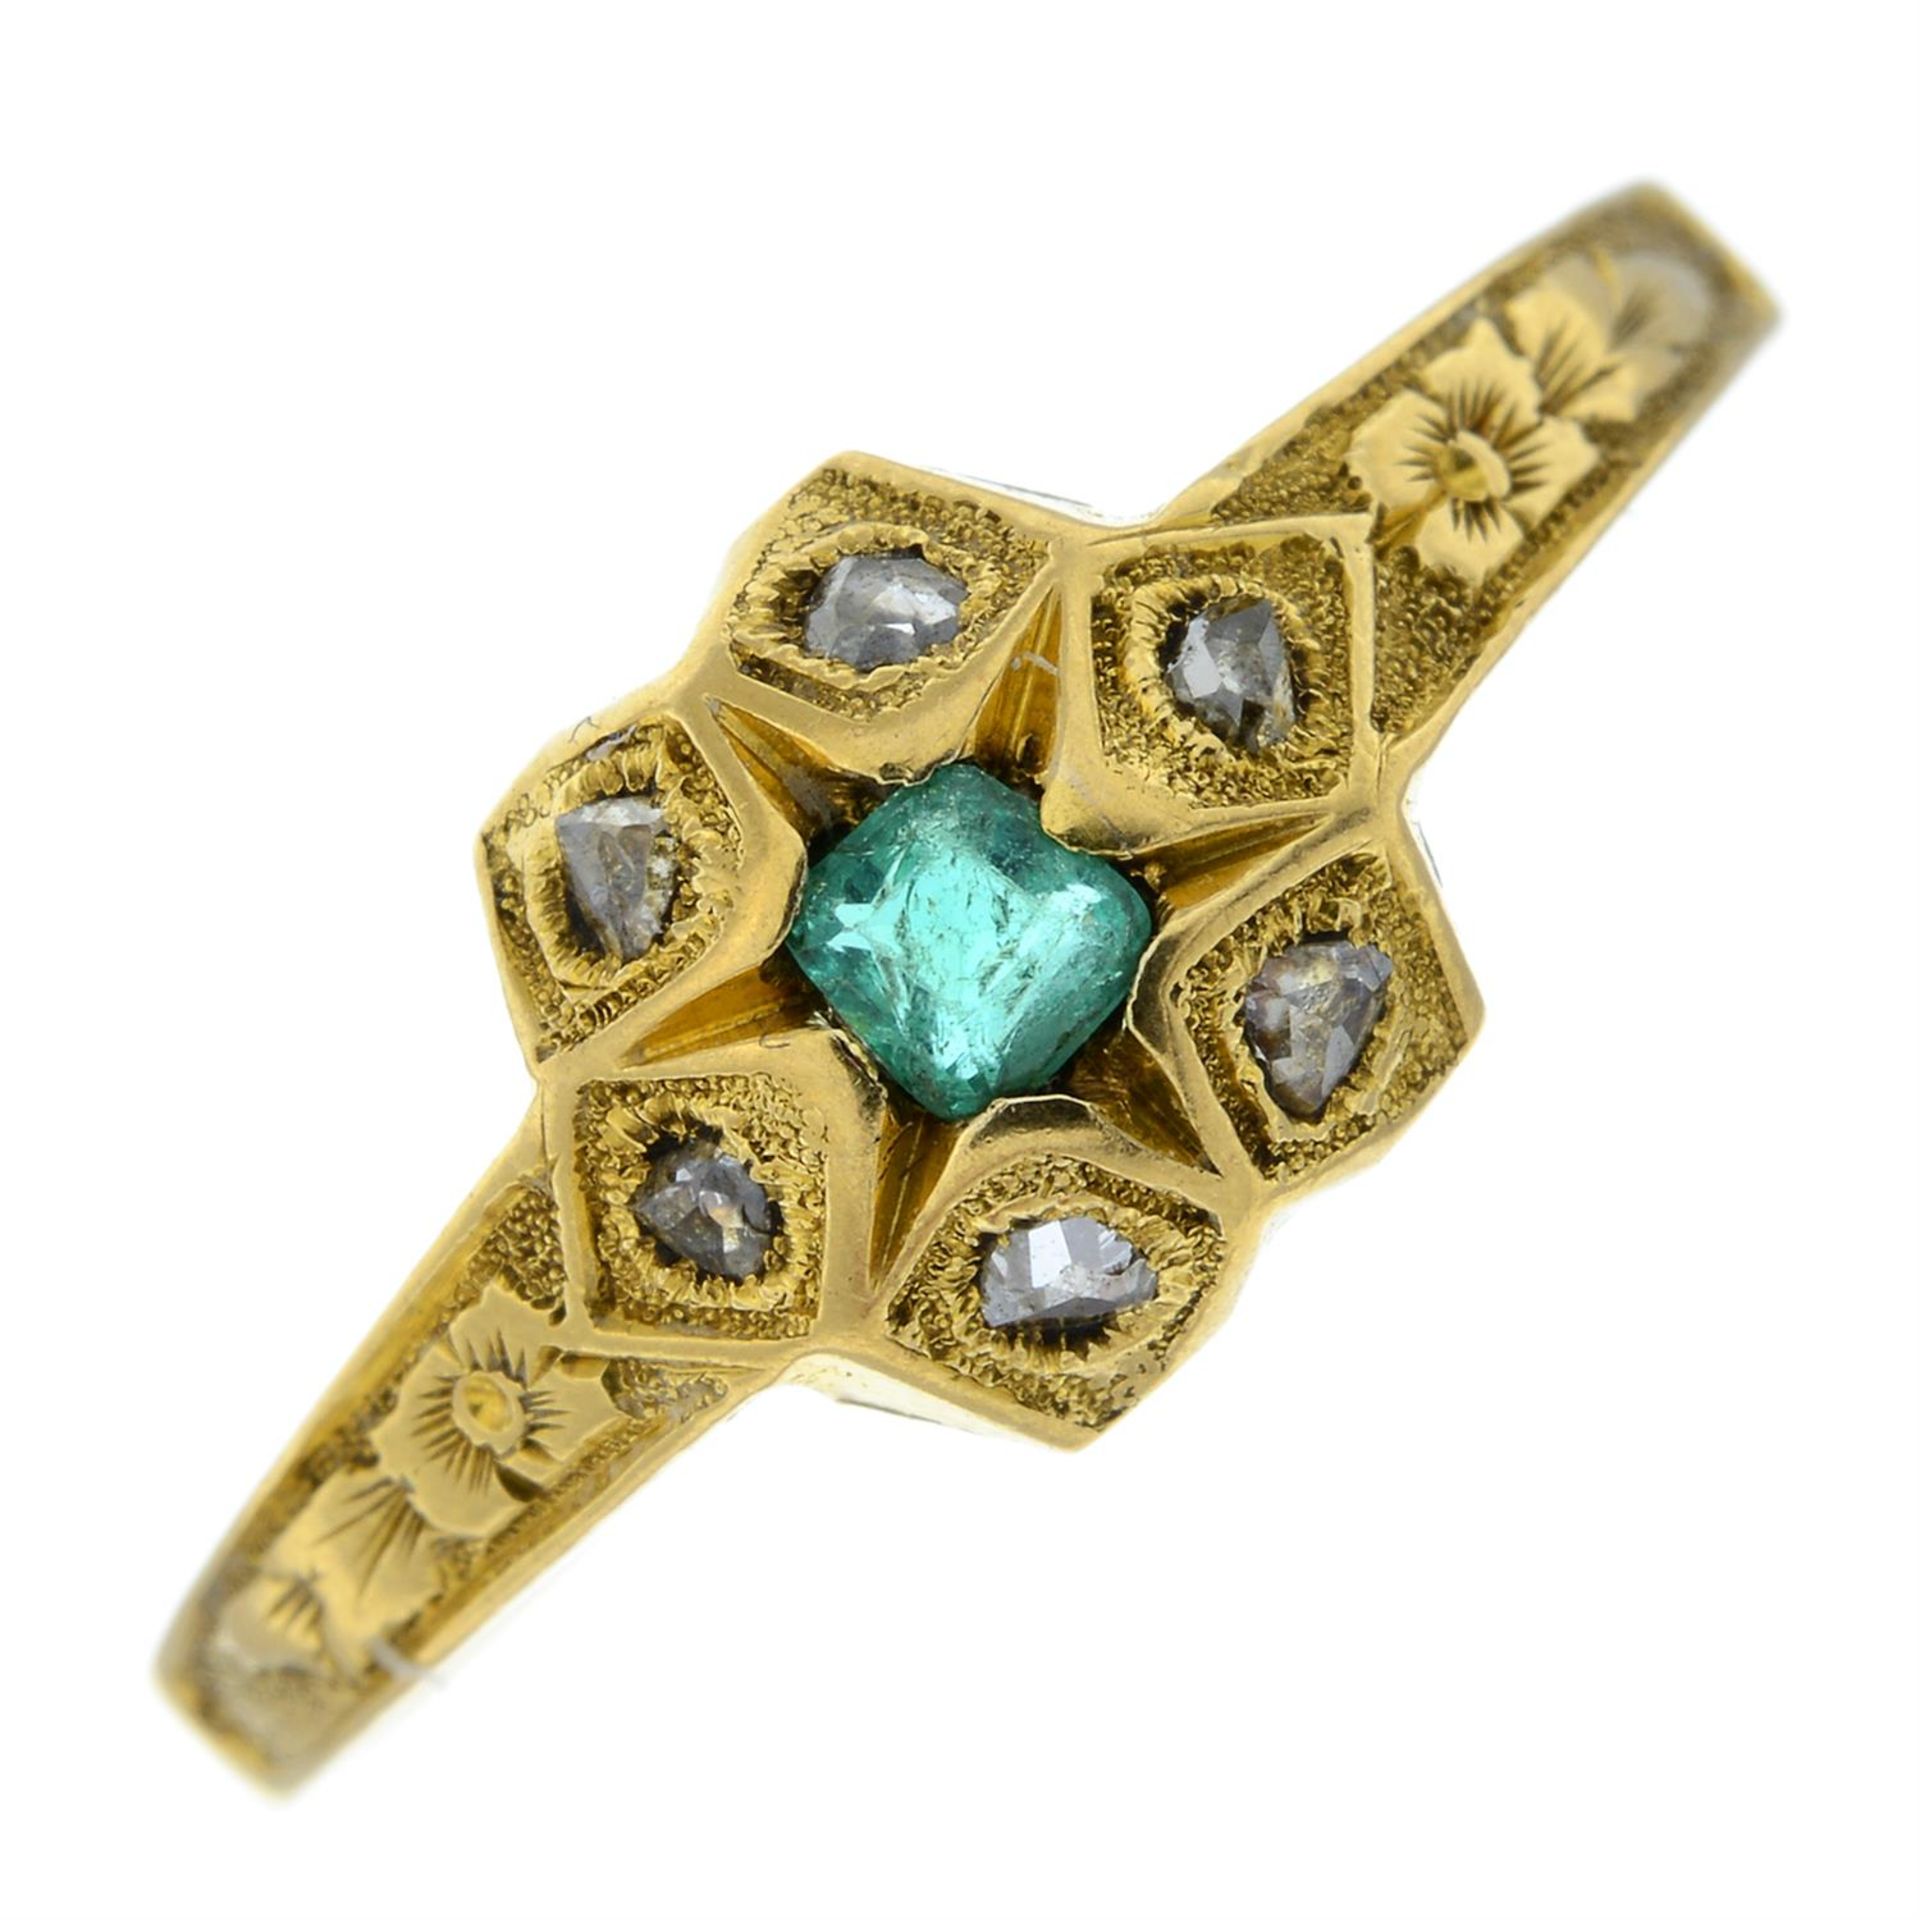 A late 19th century emerald and rose-cut diamond ring.